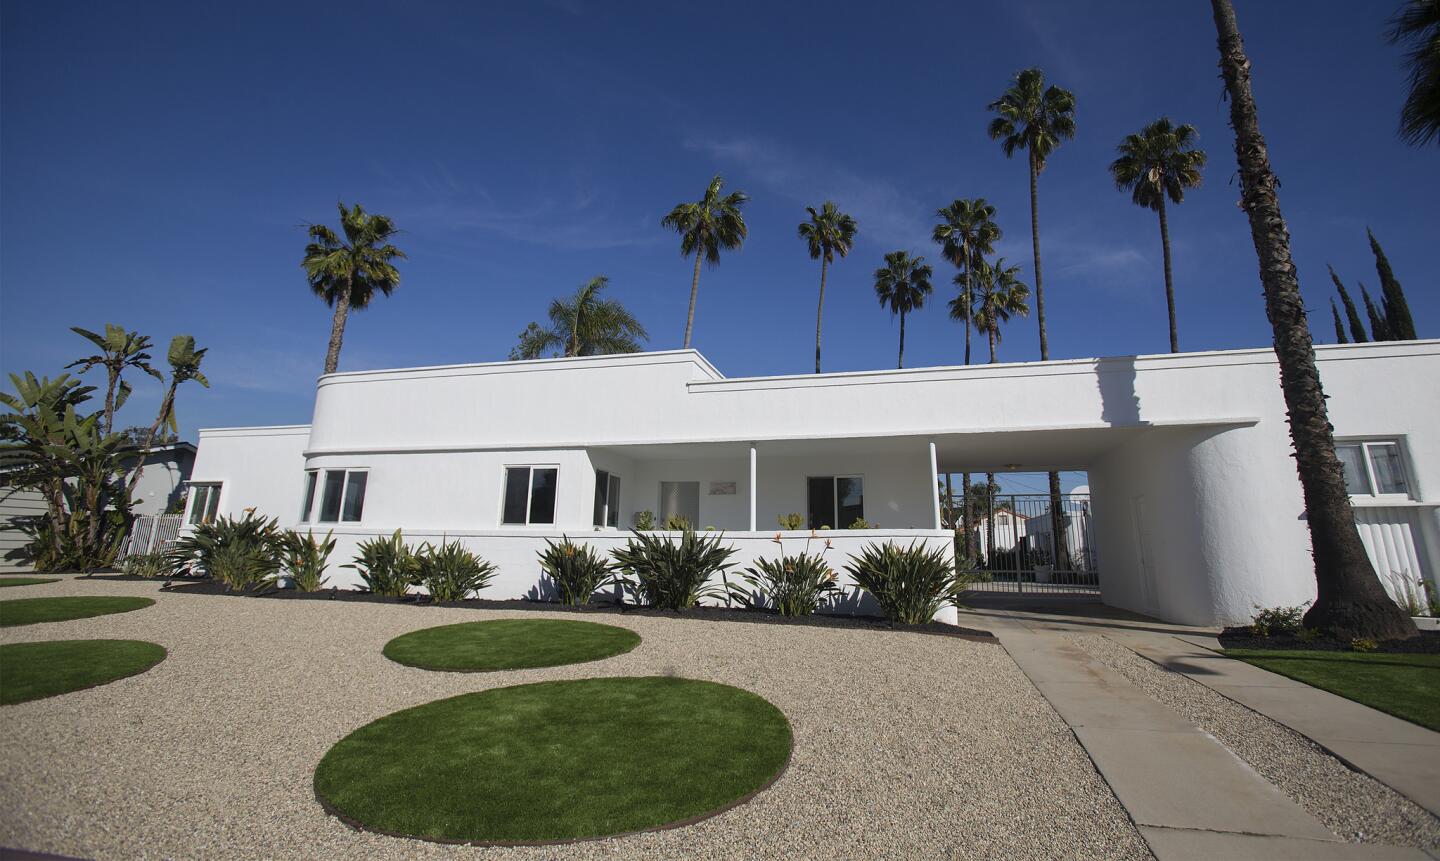 To complement the lines of their 1934 Streamline Moderne home, a Long Beach couple envisioned circles of artificial grass framed by pebbles. In addition to being bold, the design conserves water.